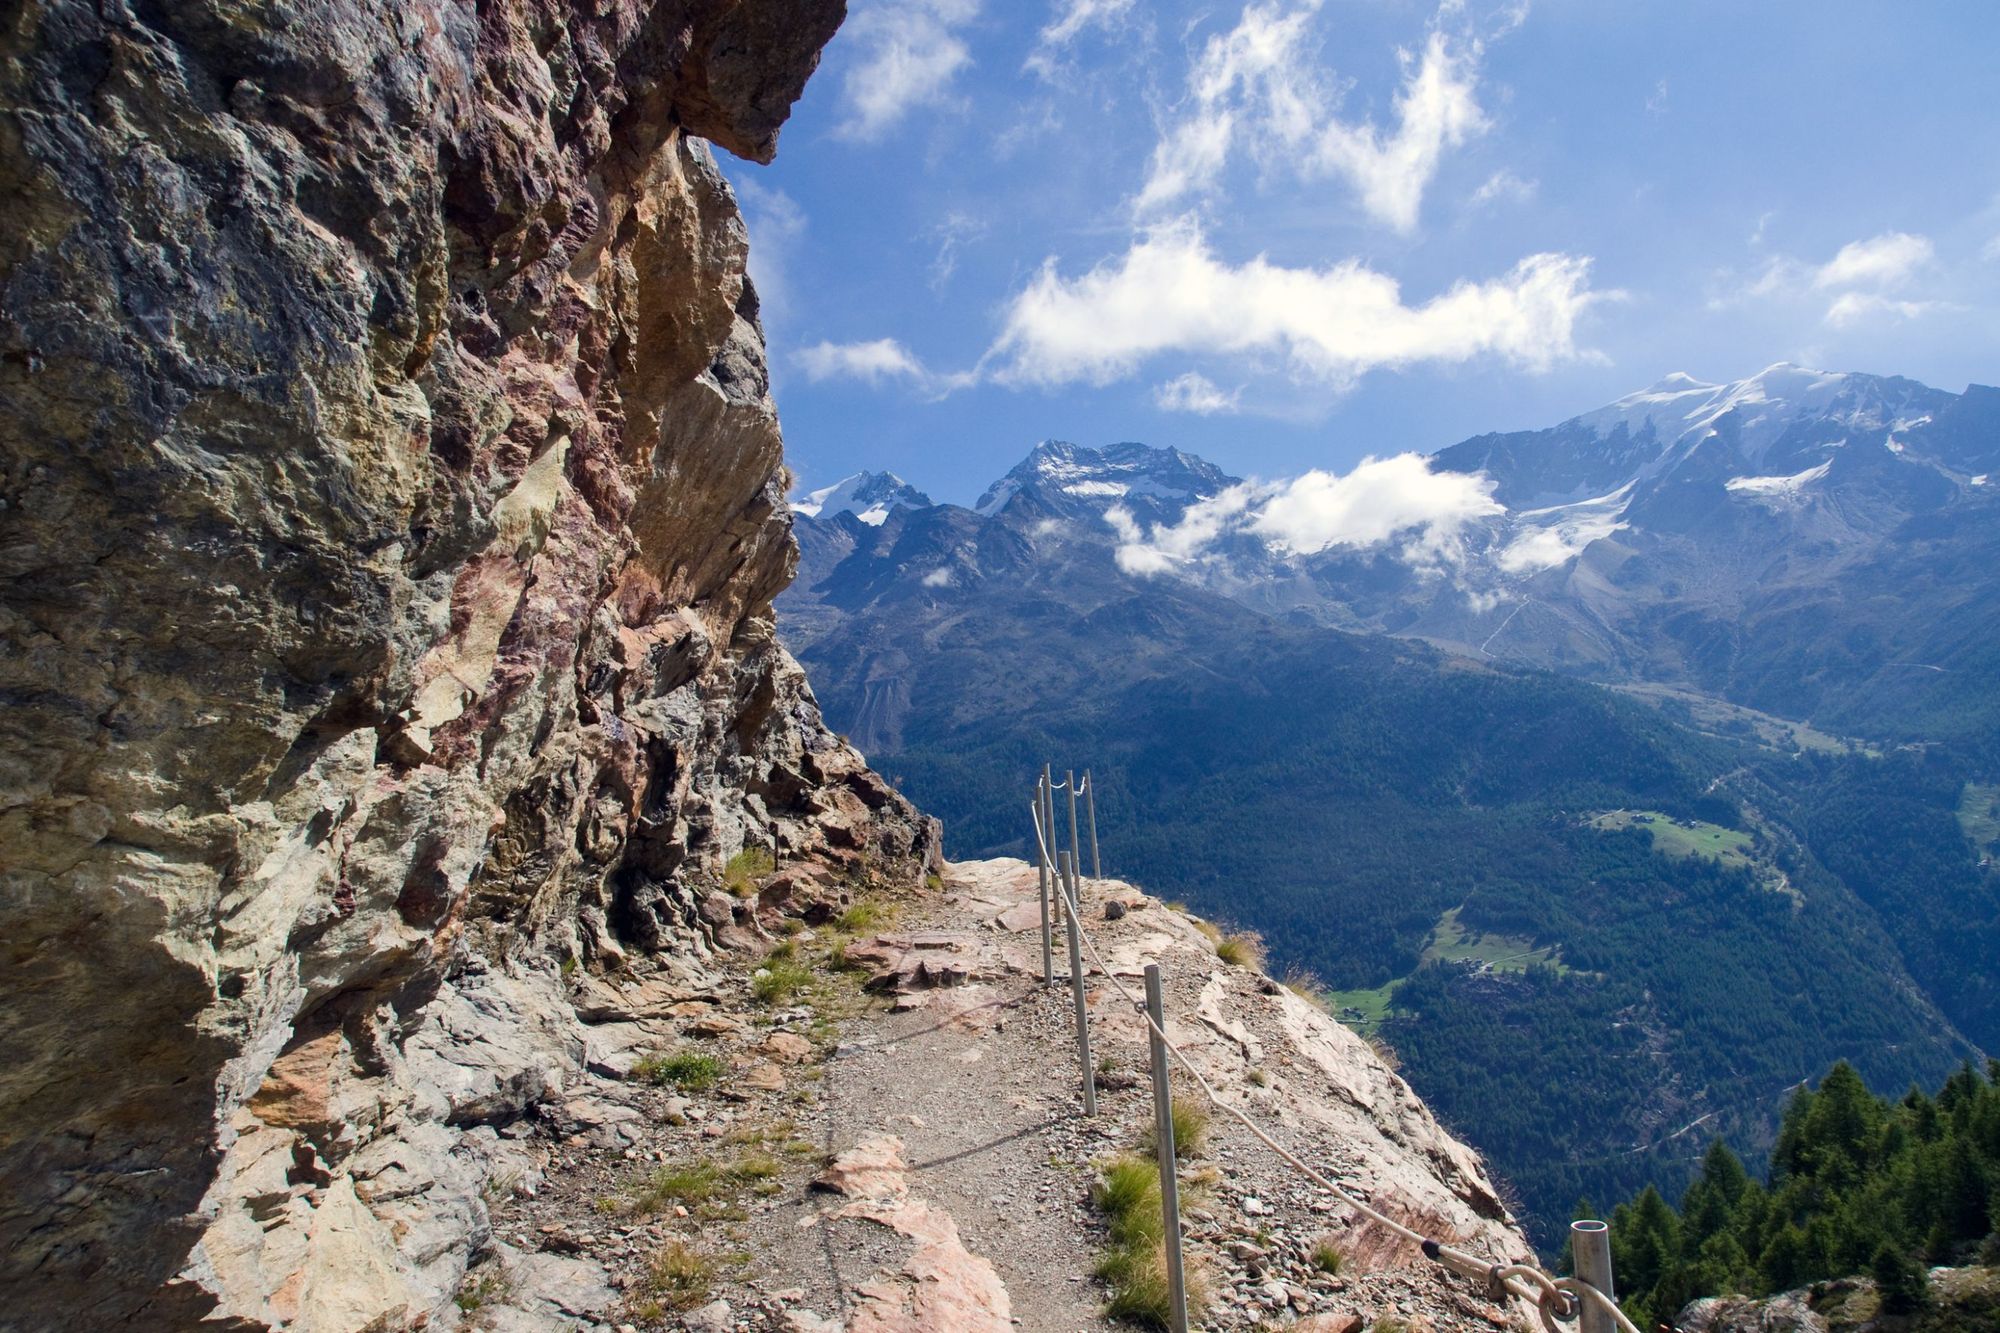 On the Höhenweg balcony trail, looking out over the Alps. Photo: Getty